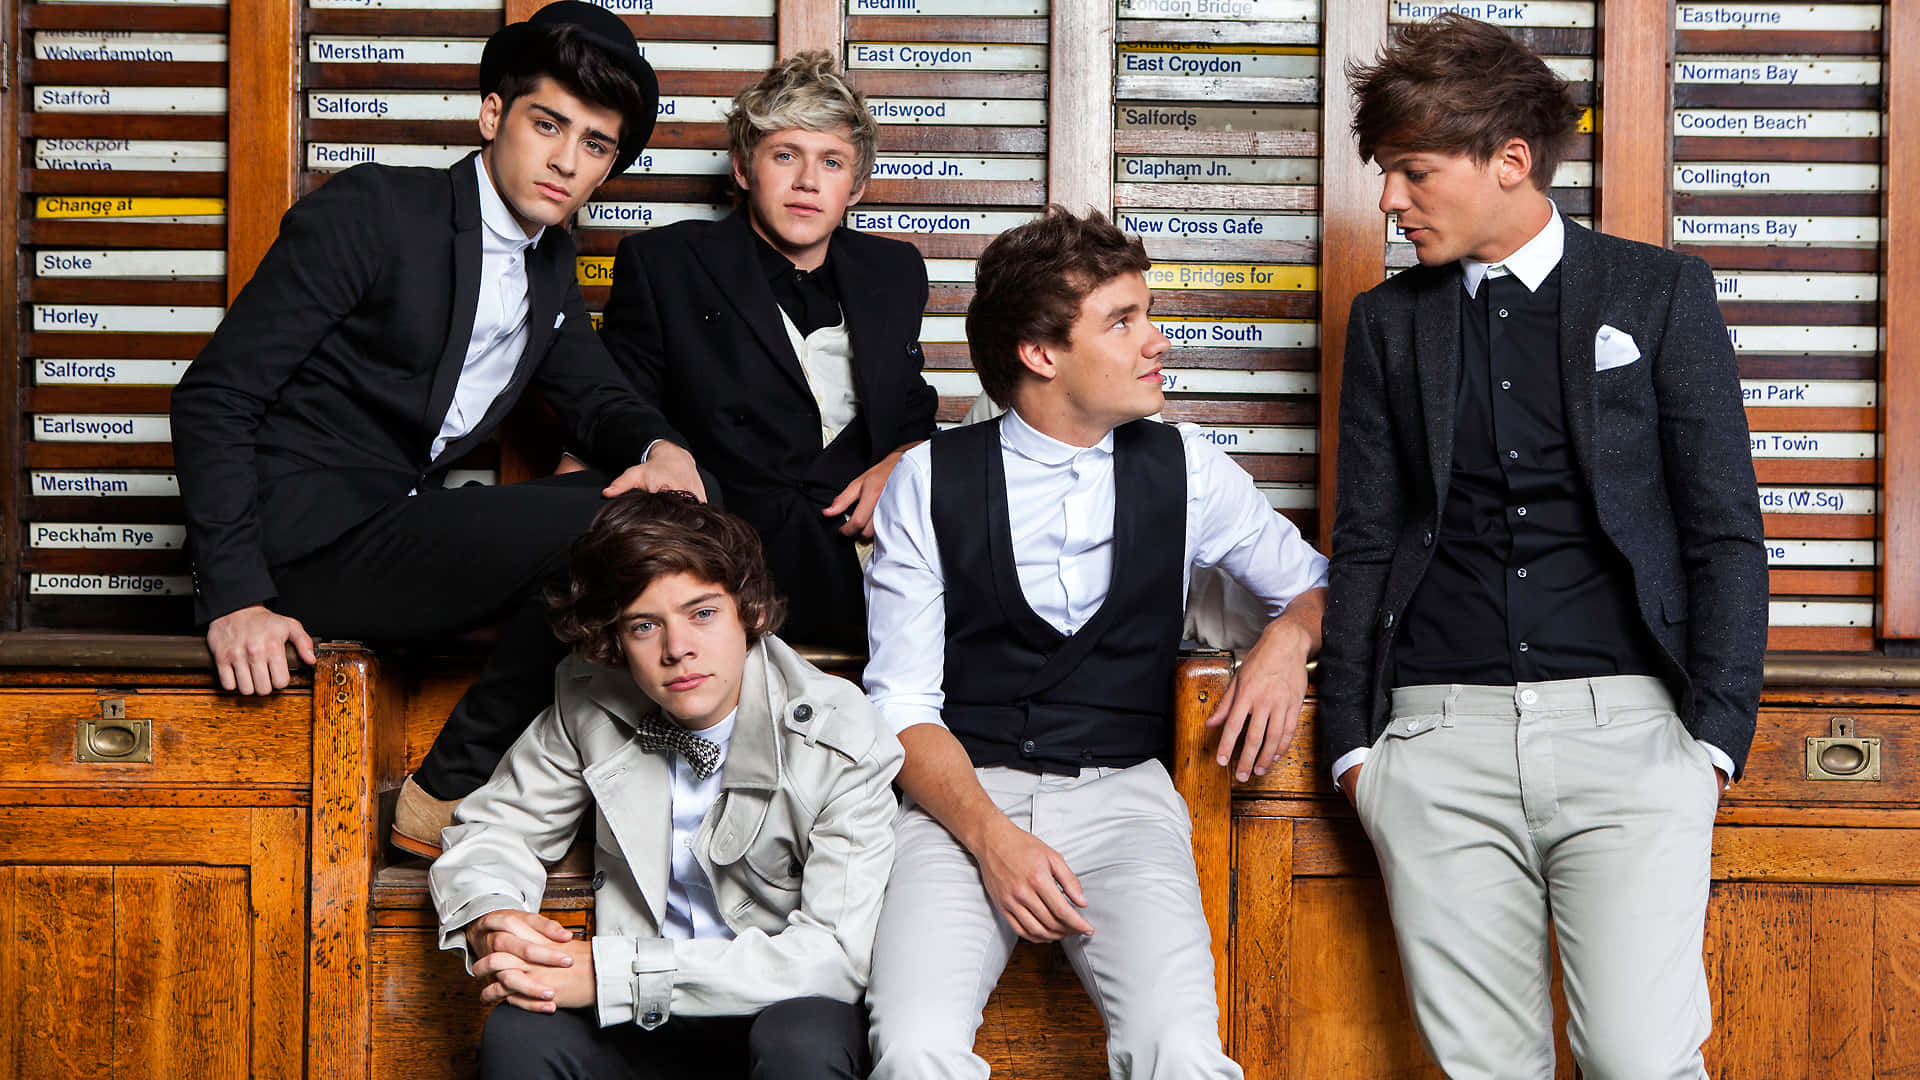 Get the One Direction Look with a Laptop Wallpaper